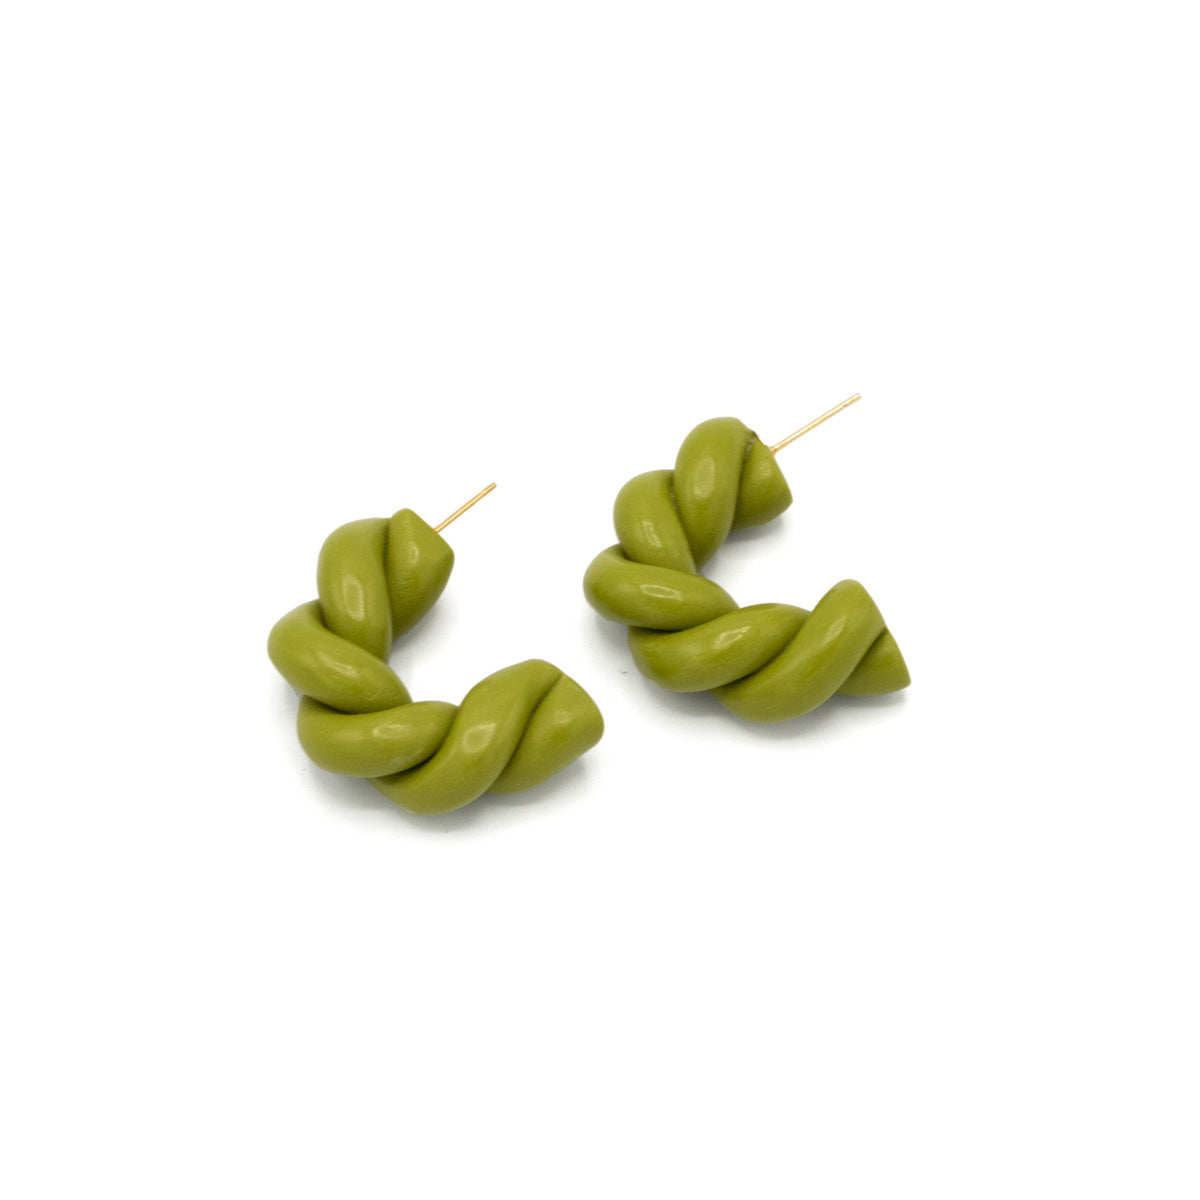 Green twisted polymer clay earrings